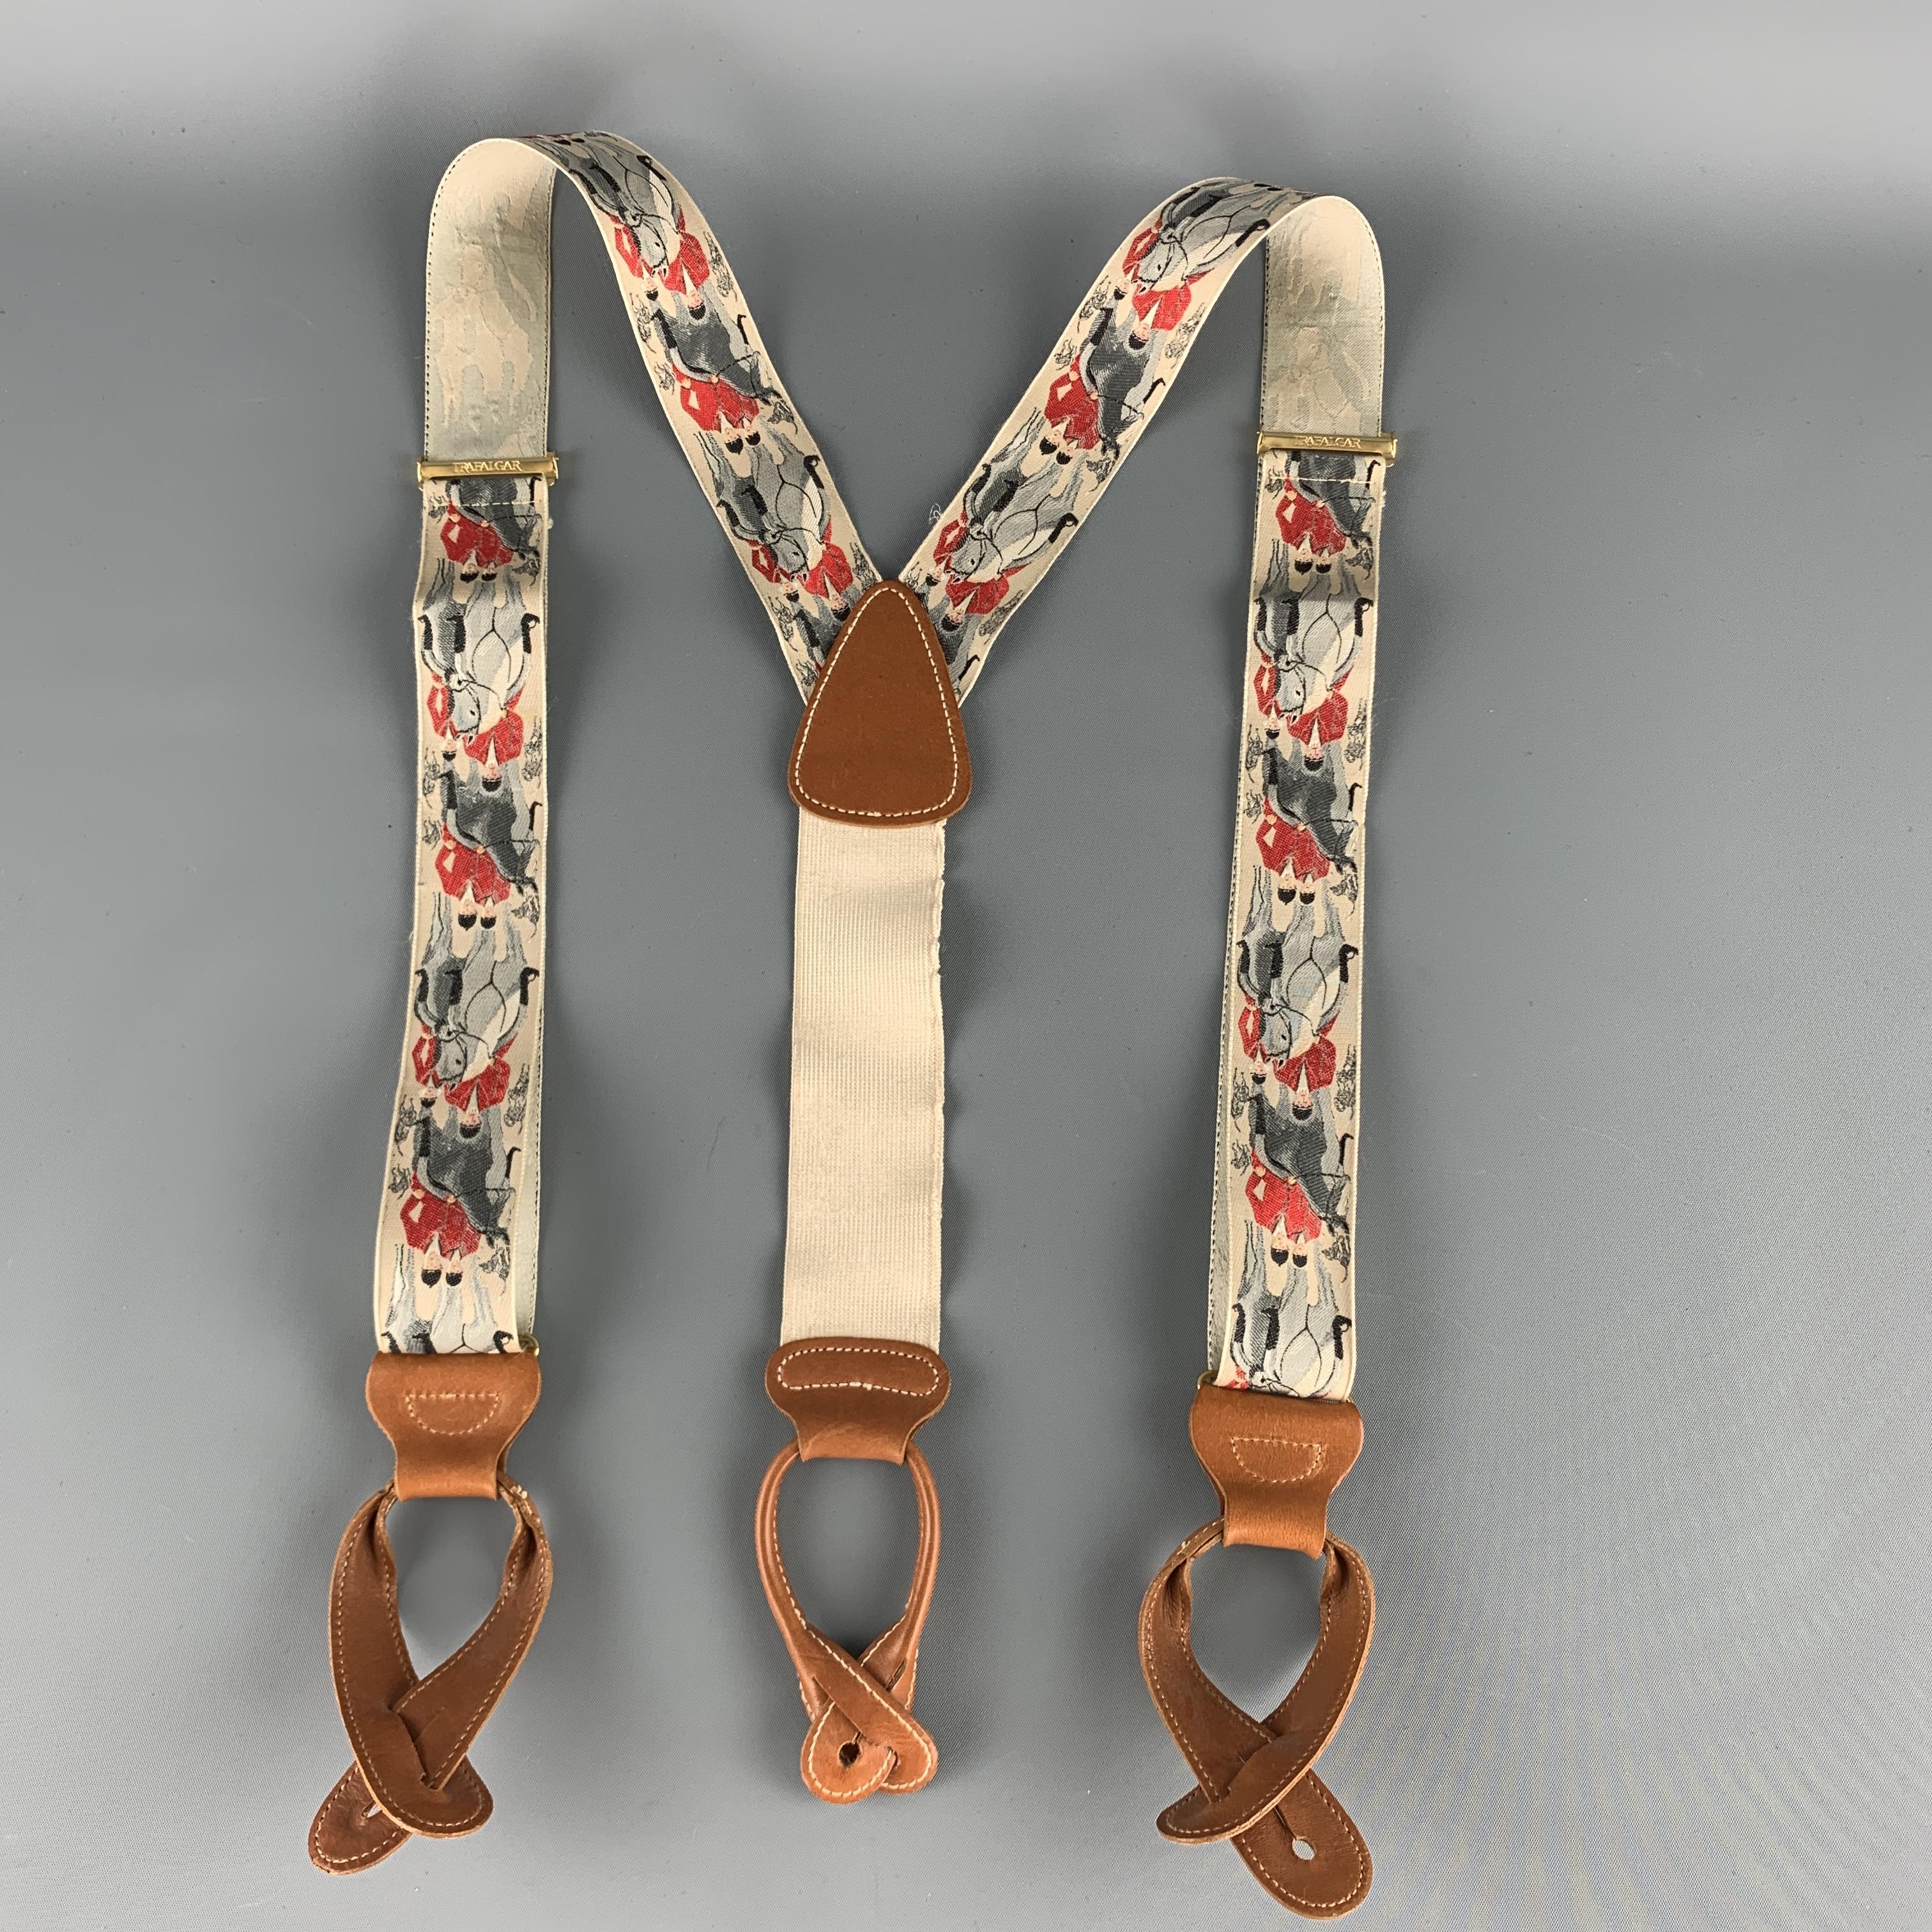 Vintage TRAFALGAR braces feature light beige equestrian print adjustable straps and tan leather accents. 

Good Pre-Owned Condition.

Strap Width: 1.75 in. 